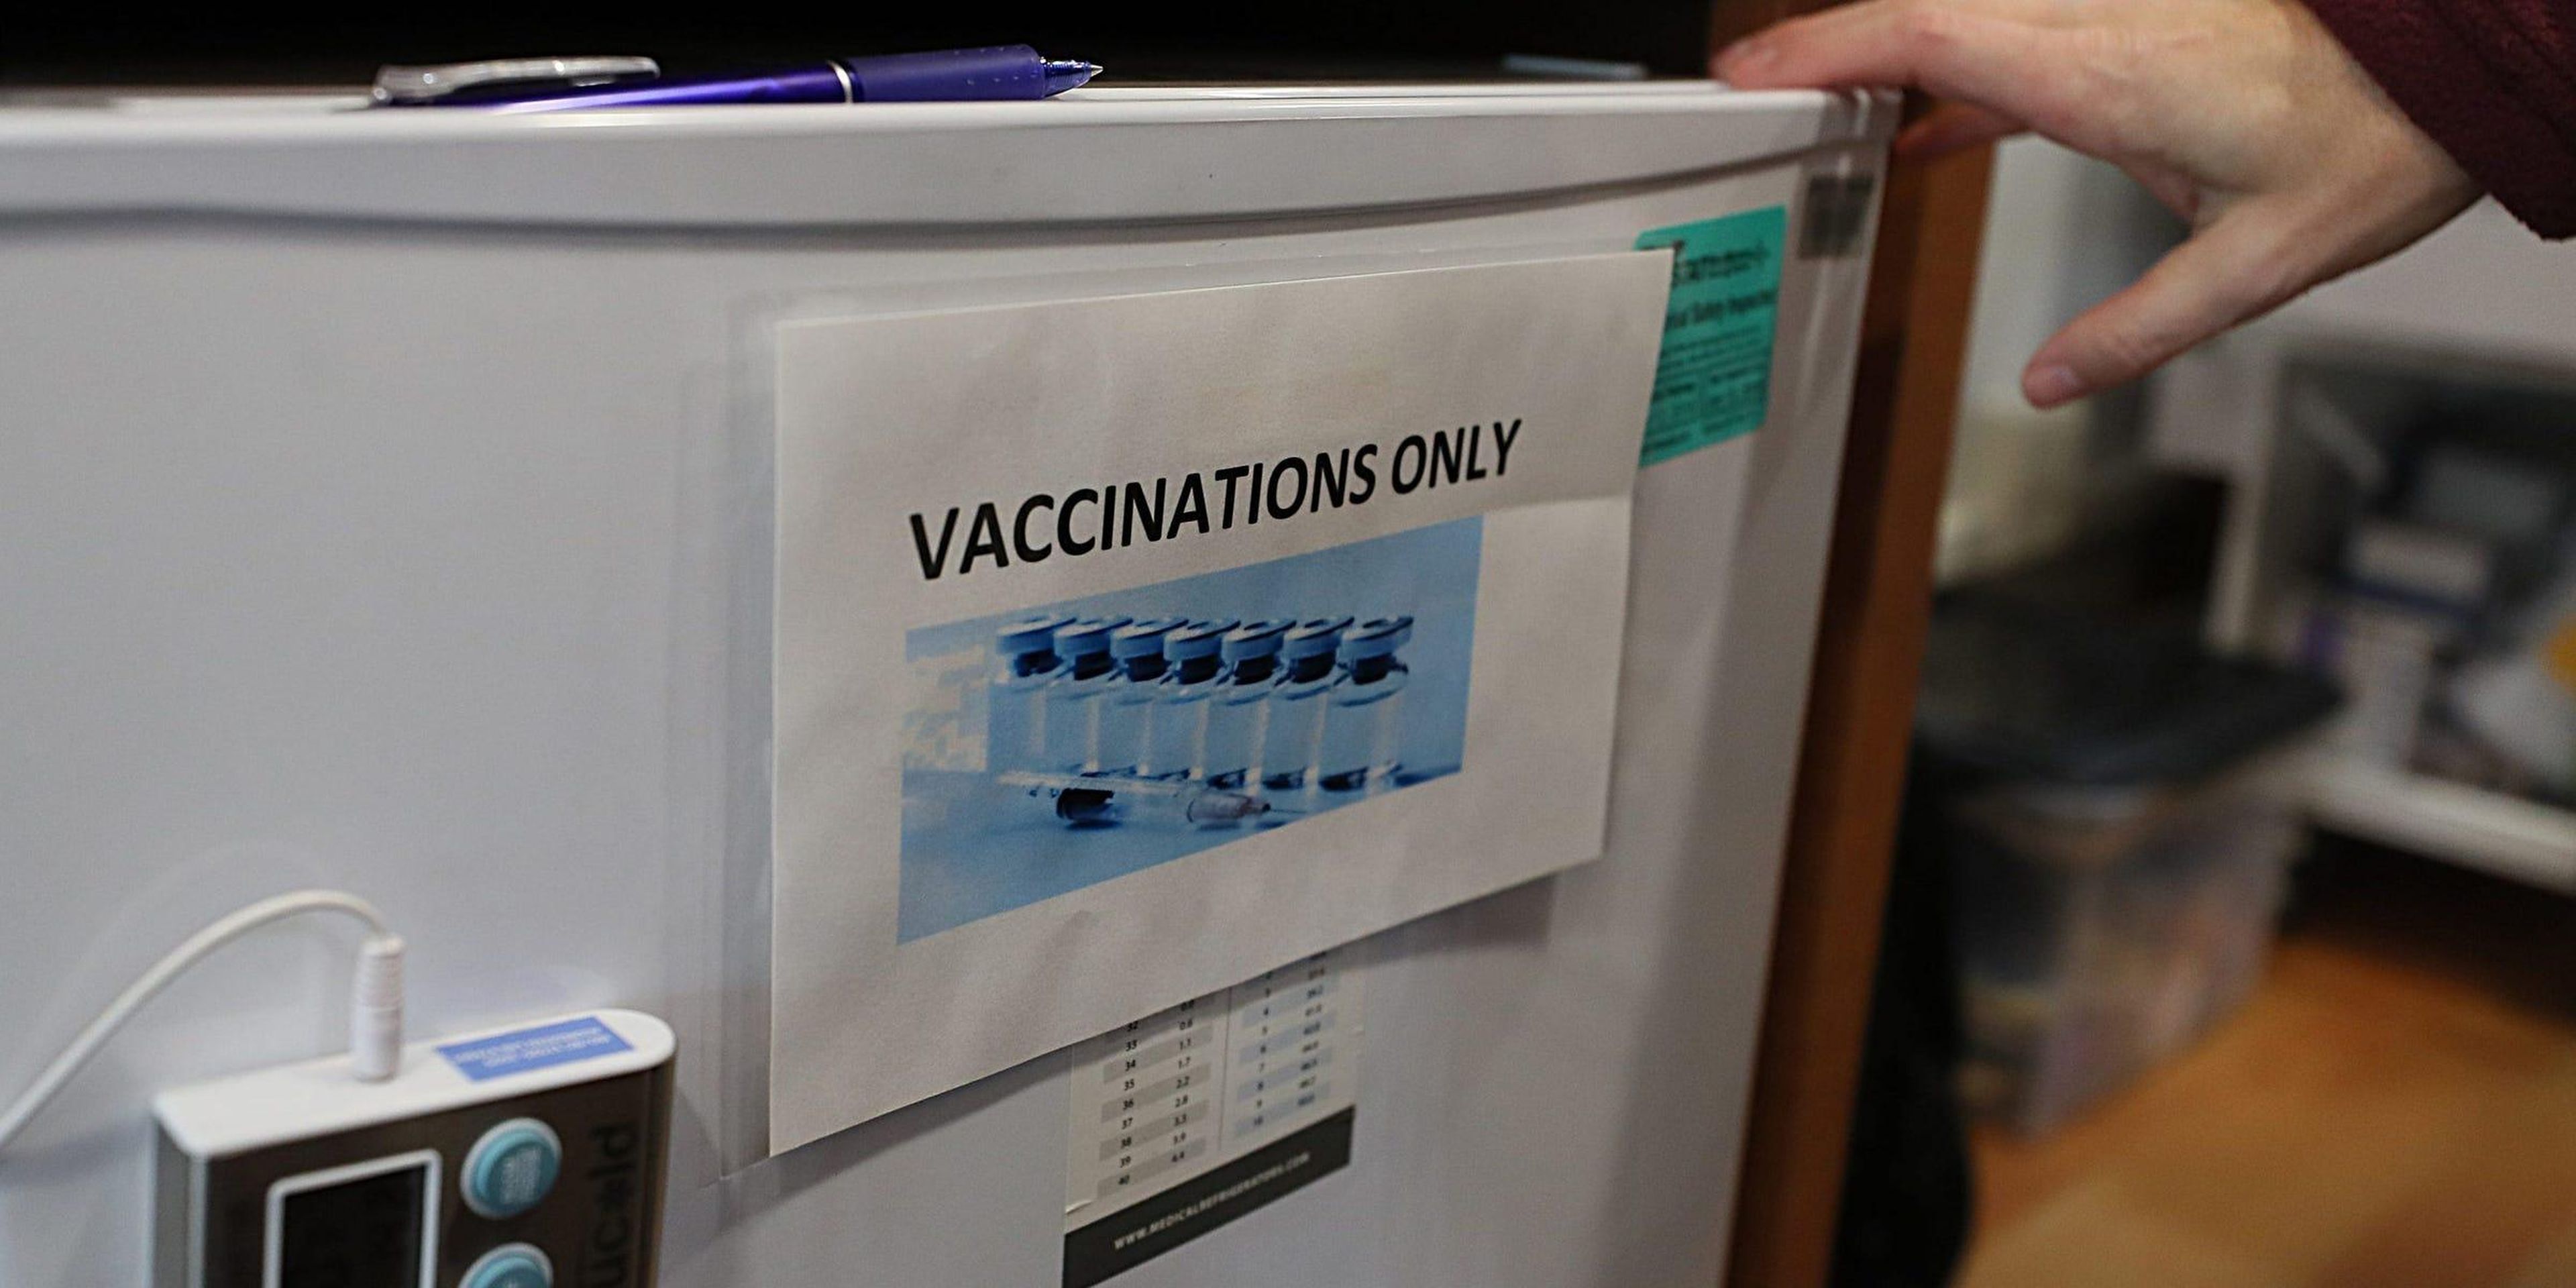 A refrigerator containing vaccines seen at the Kraft Center for Community Health in Boston on January 2, 2019.